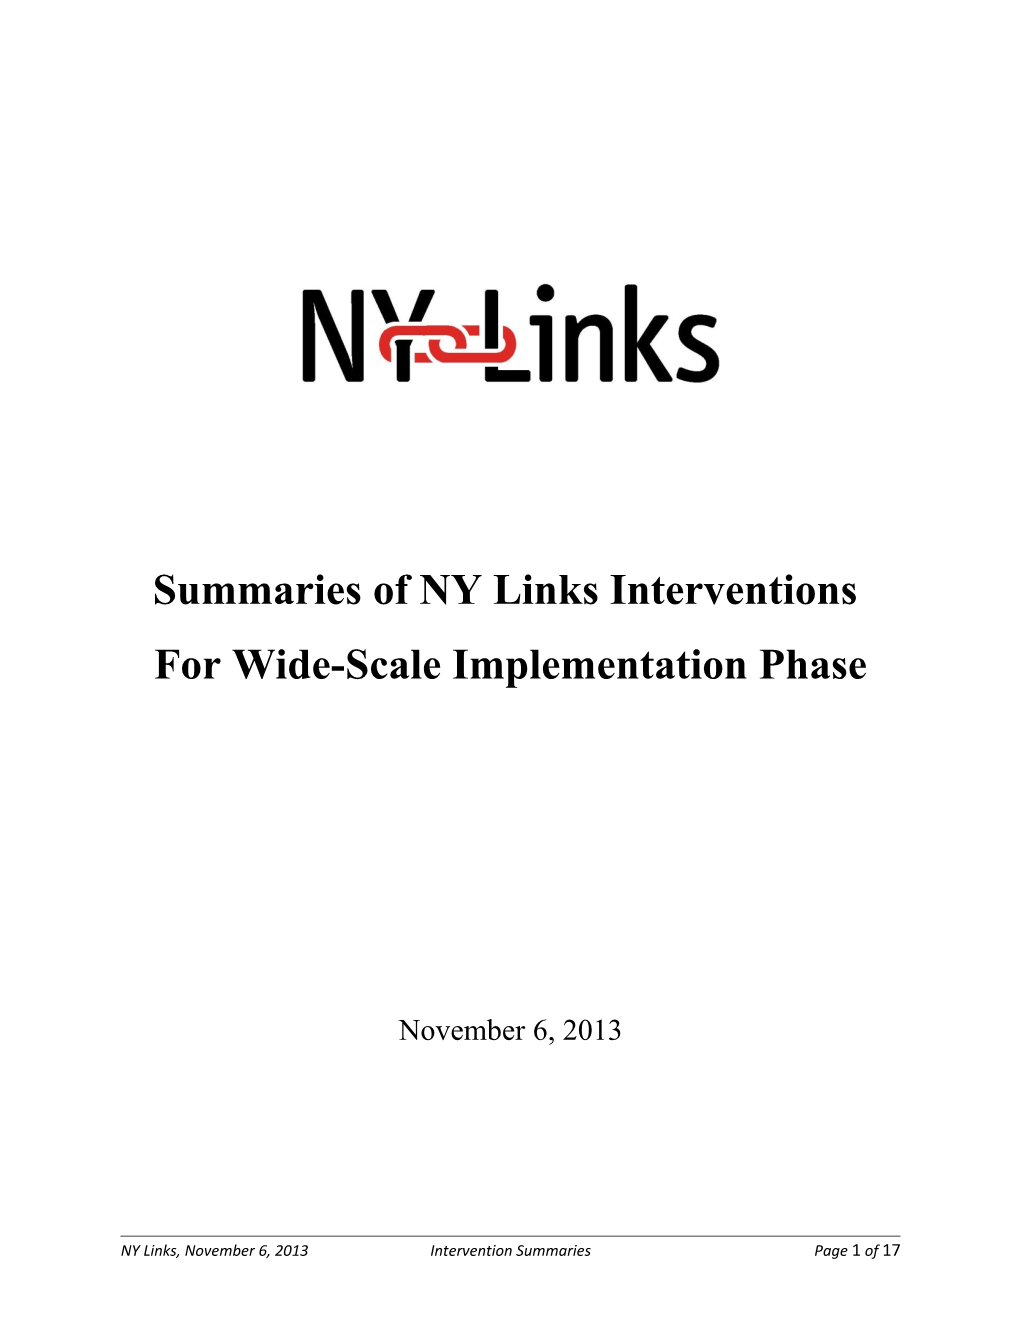 For Wide-Scale Implementationphase